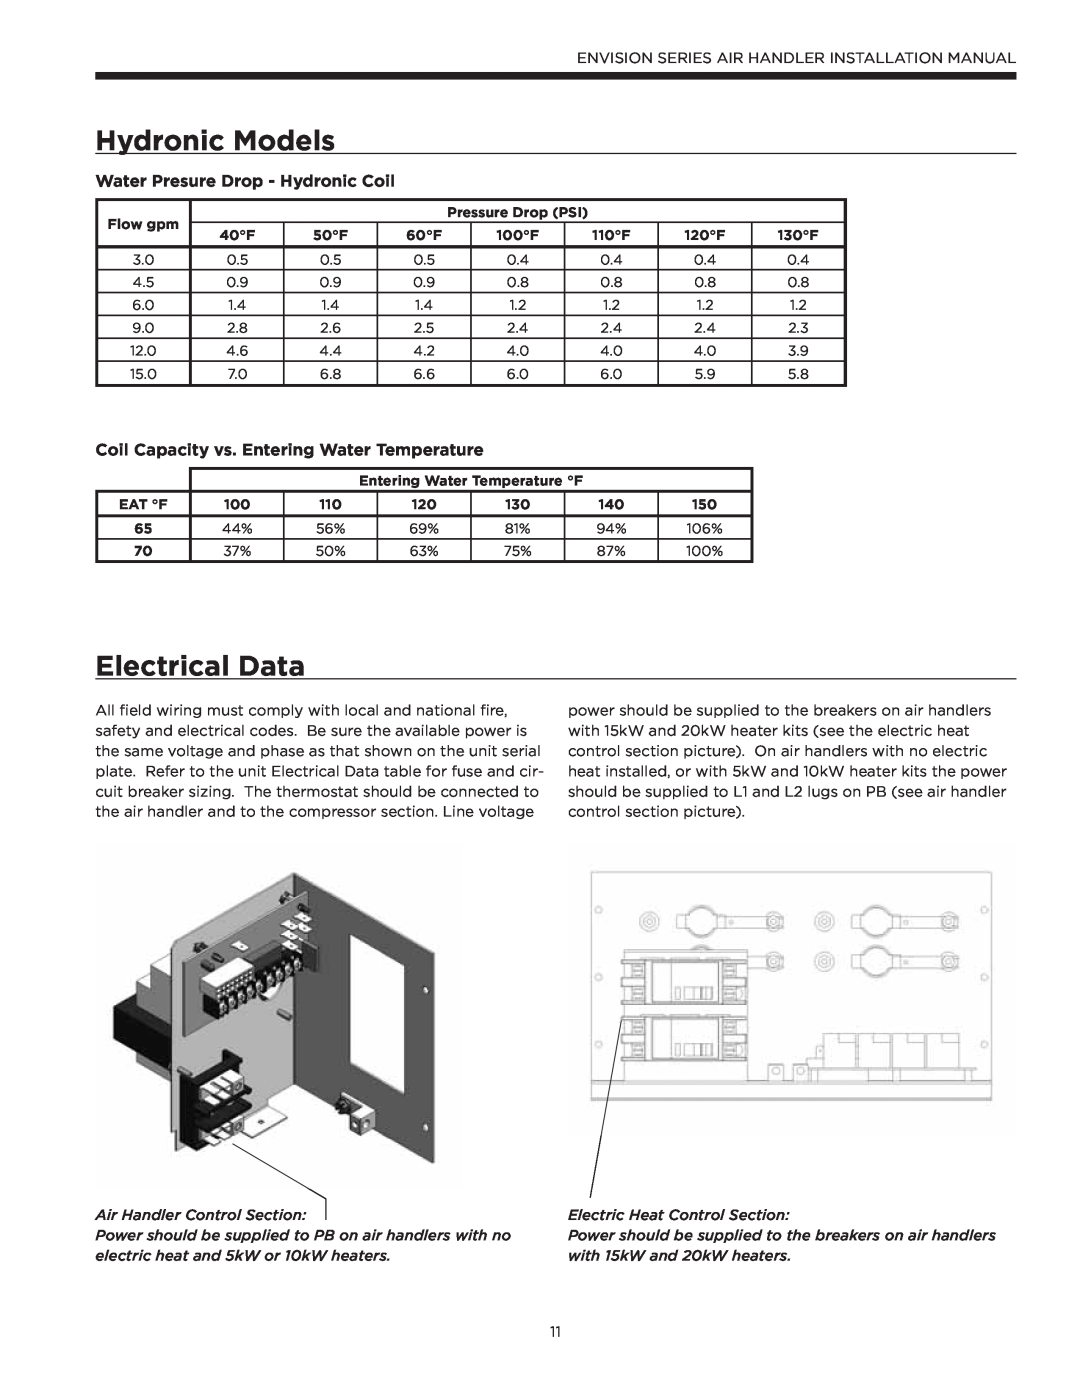 Envision Peripherals IM1603 Electrical Data, Water Presure Drop - Hydronic Coil, Hydronic Models, Flow gpm, 100F, 110F 